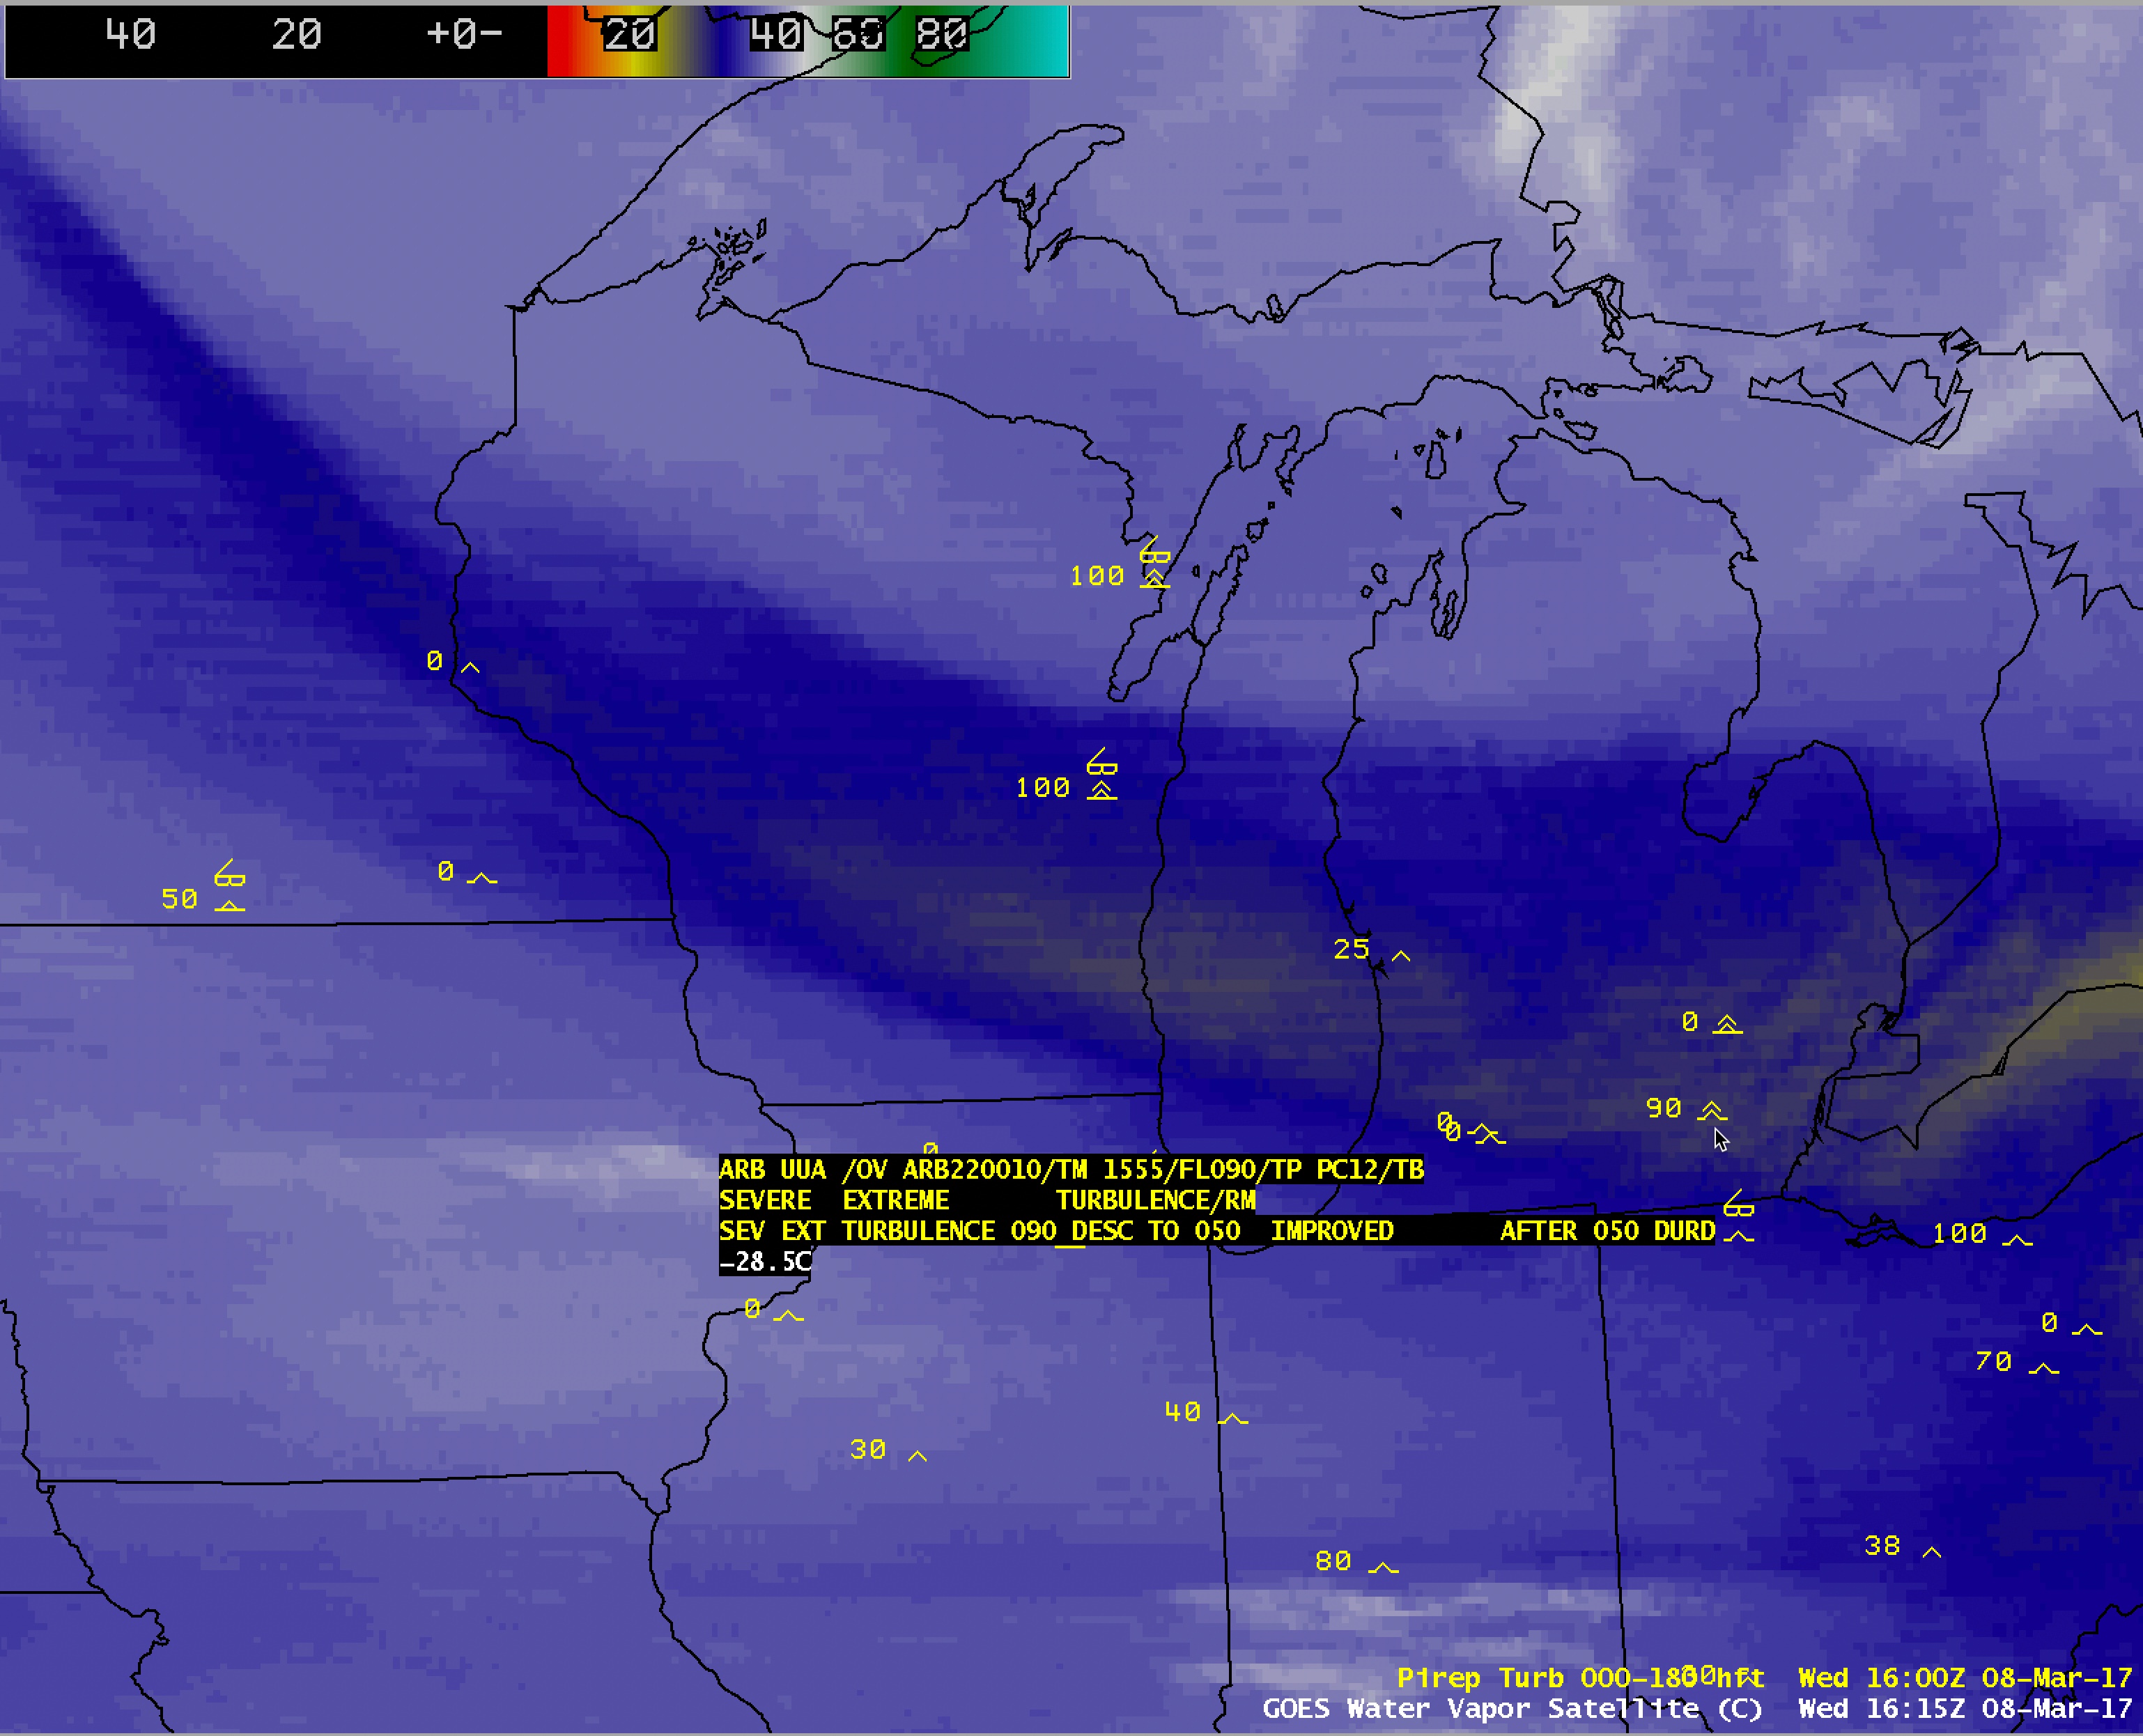 GOES-13 Water Vapor (6.5 µm) images, with pilot reports of turbulence [click to play animation]